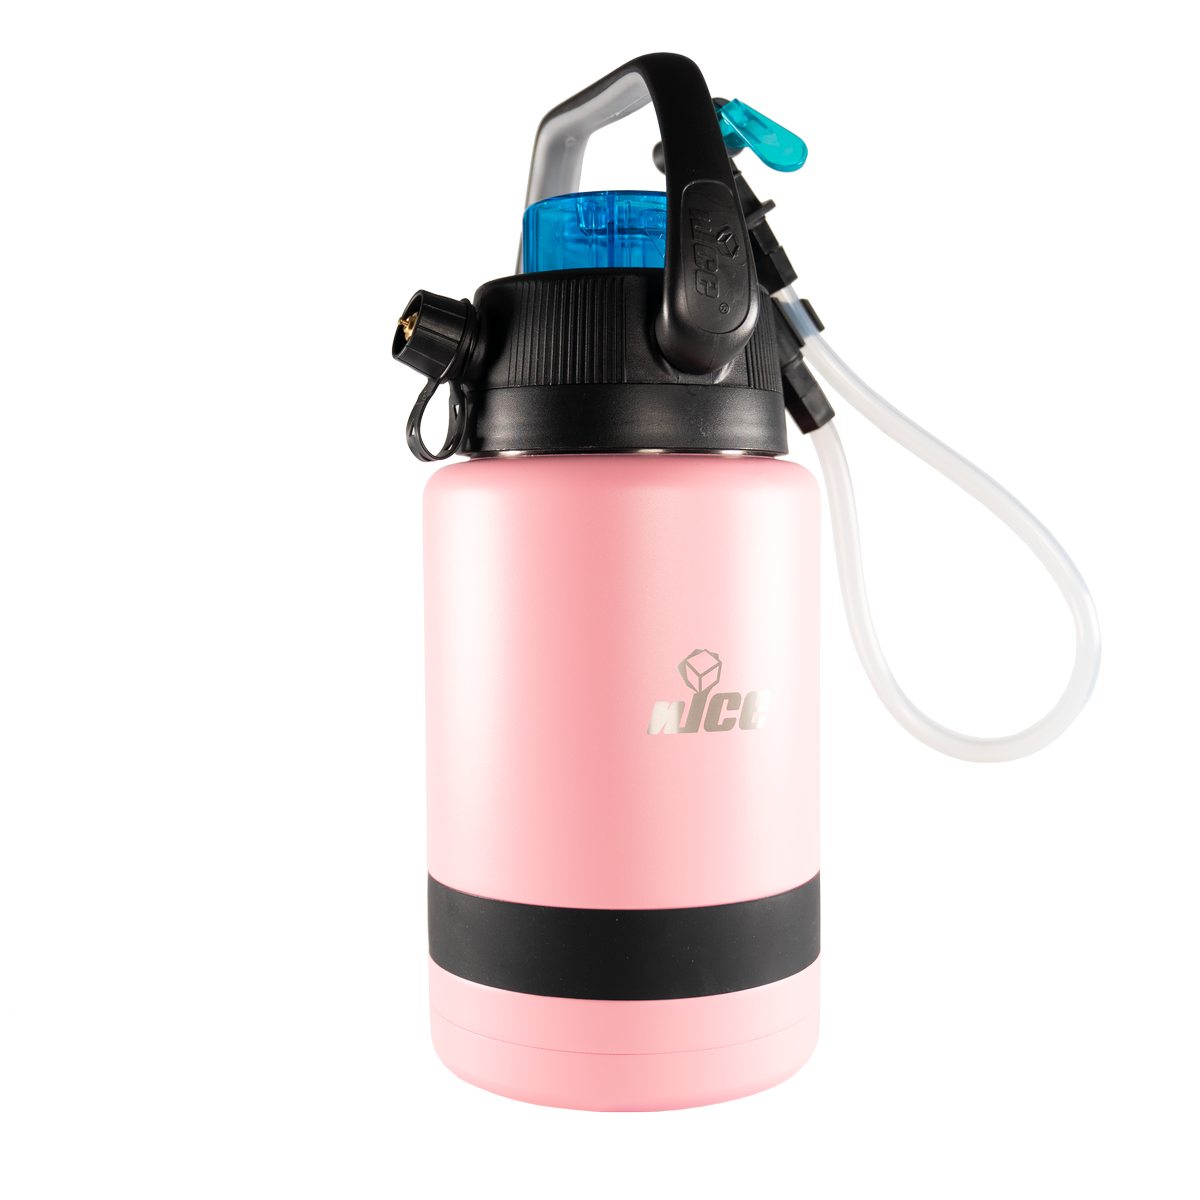 Tpf-520509 1 Gal Pump 2 Pour Insulated Jug With Hose & Spout - Pink